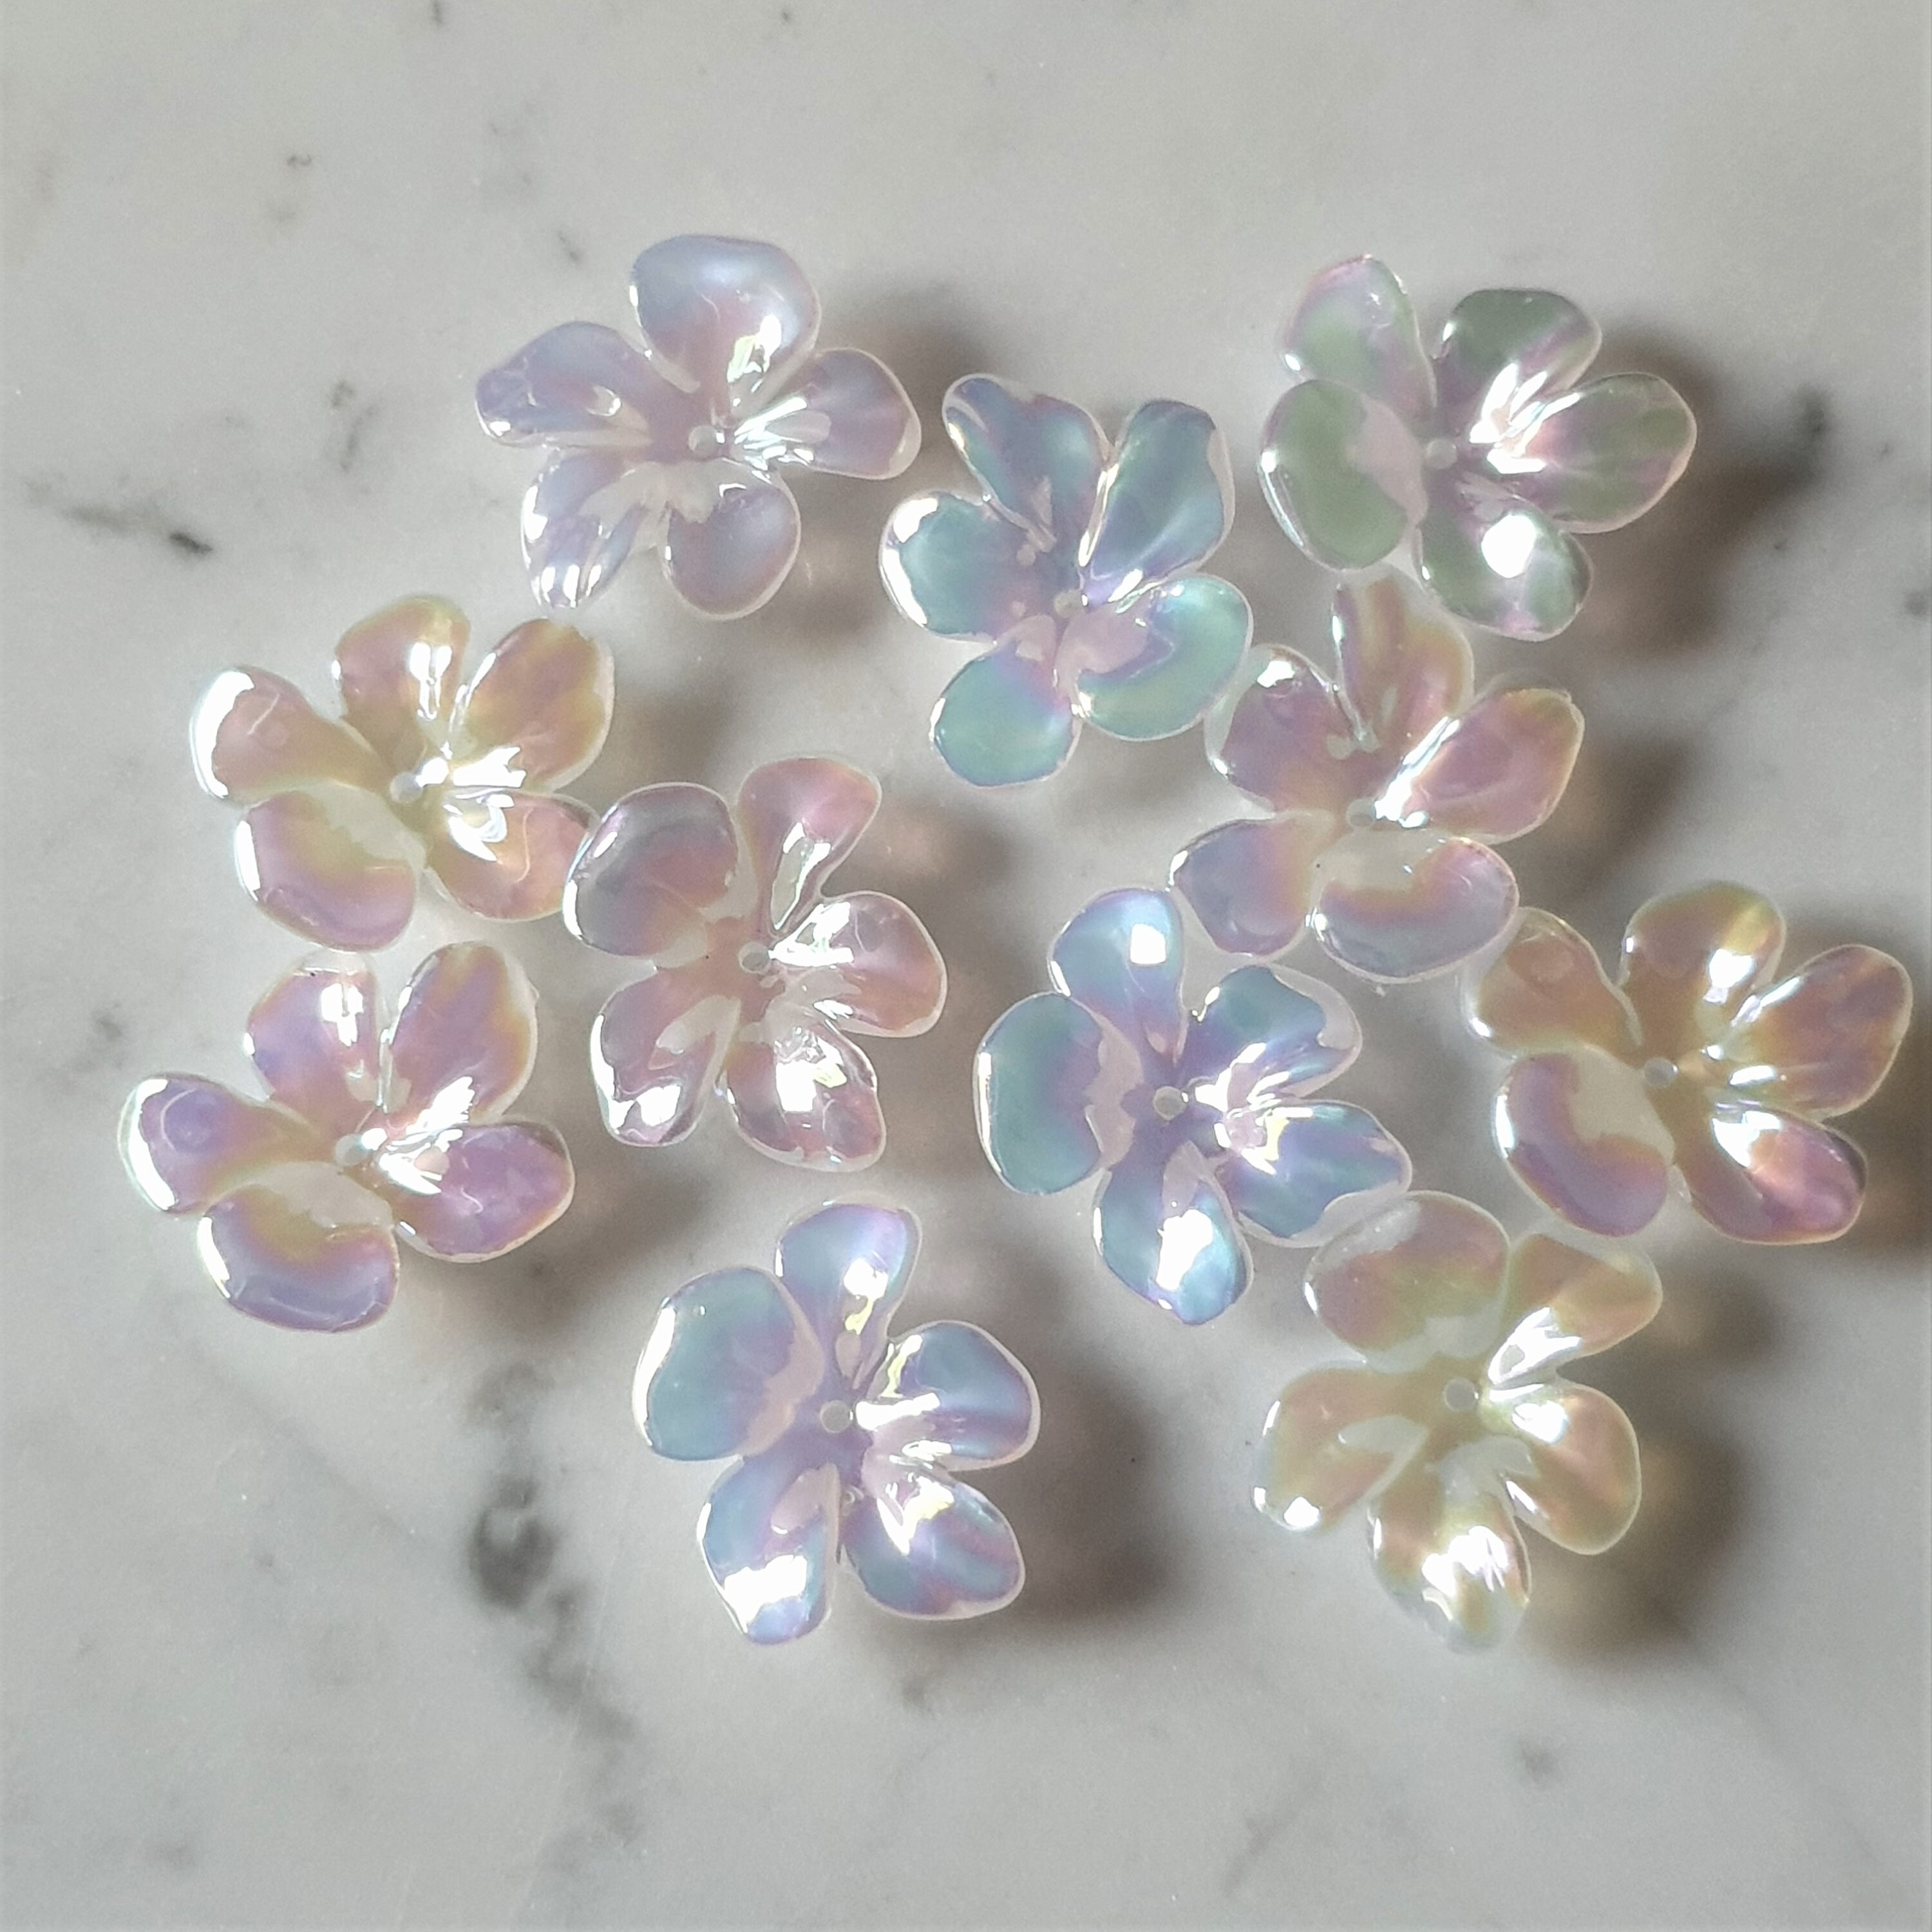 2 White Flower Charms with Rainbow Iridescence, Cellulose Acetate, 48